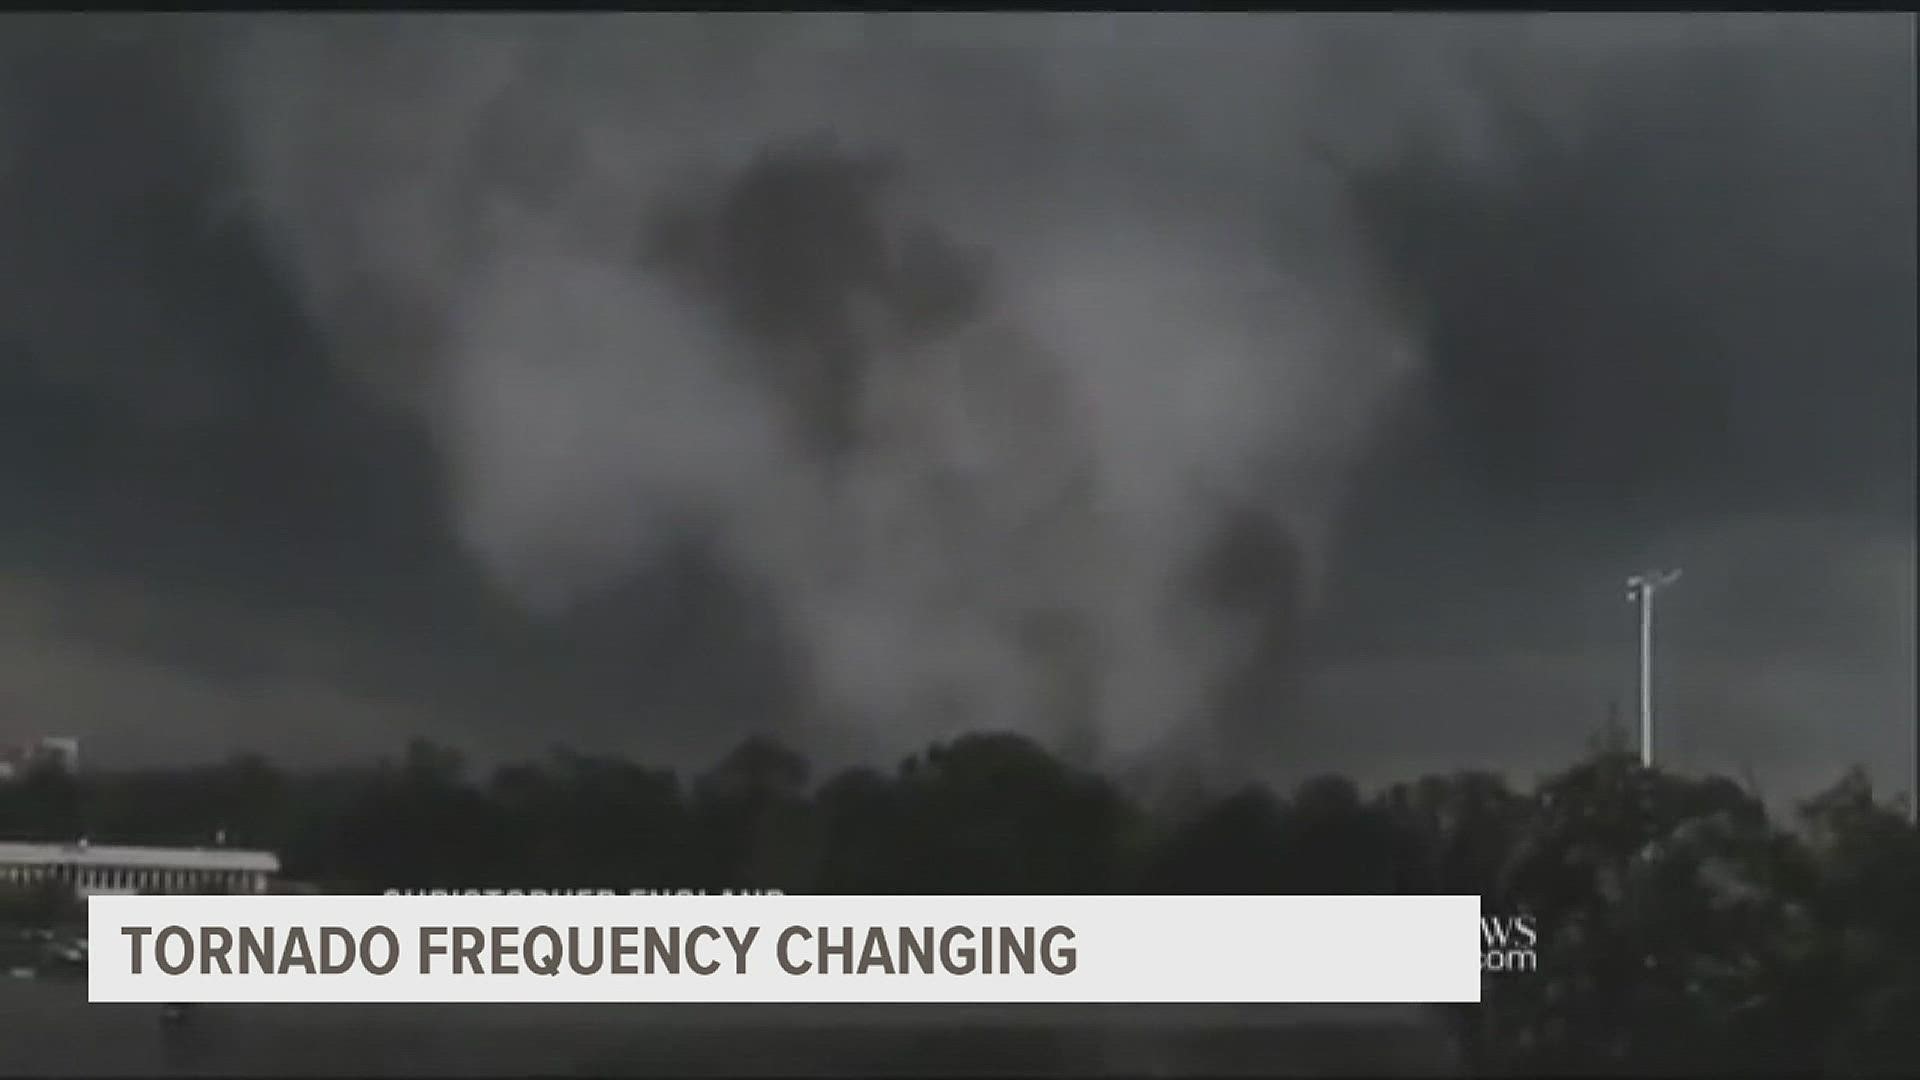 Some climate modeling data is behind the frequent changing of tornadoes.